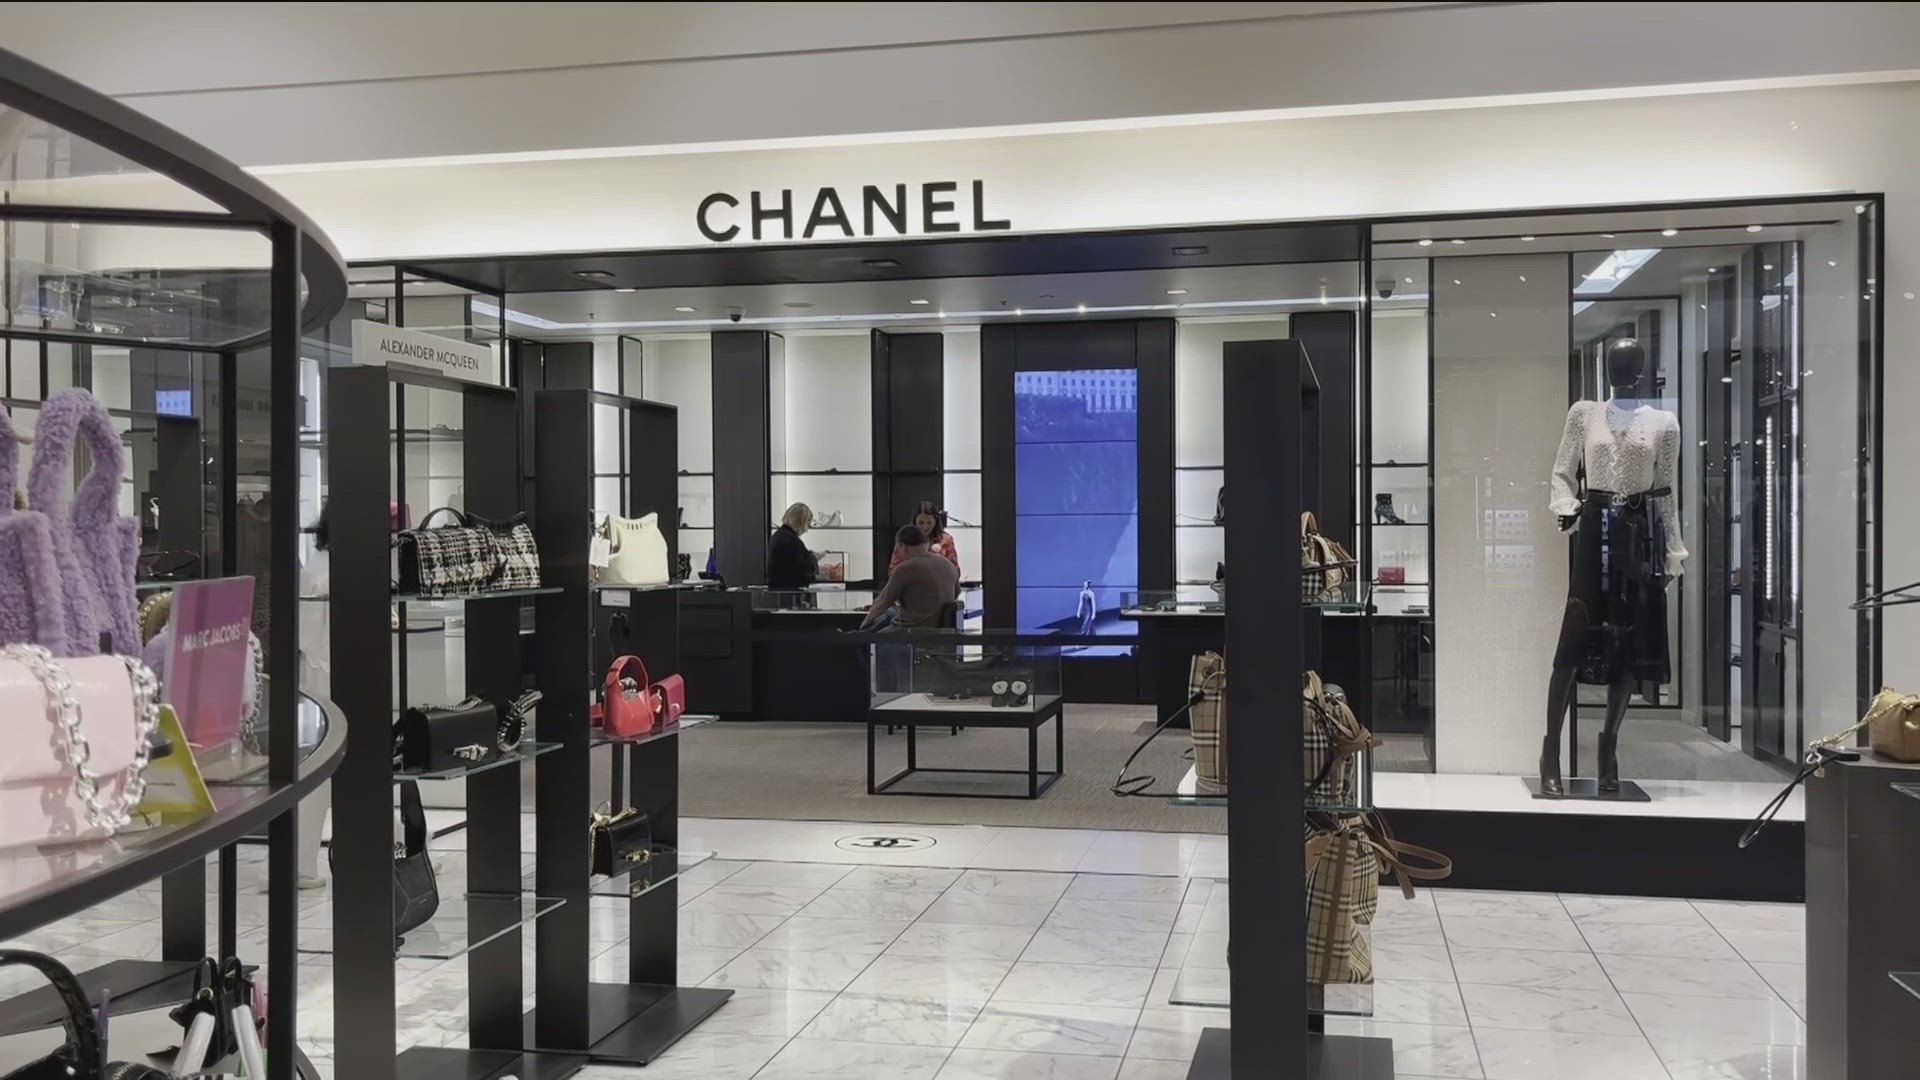 Smash-and-grab suspects rob Fashion Valley Chanel store